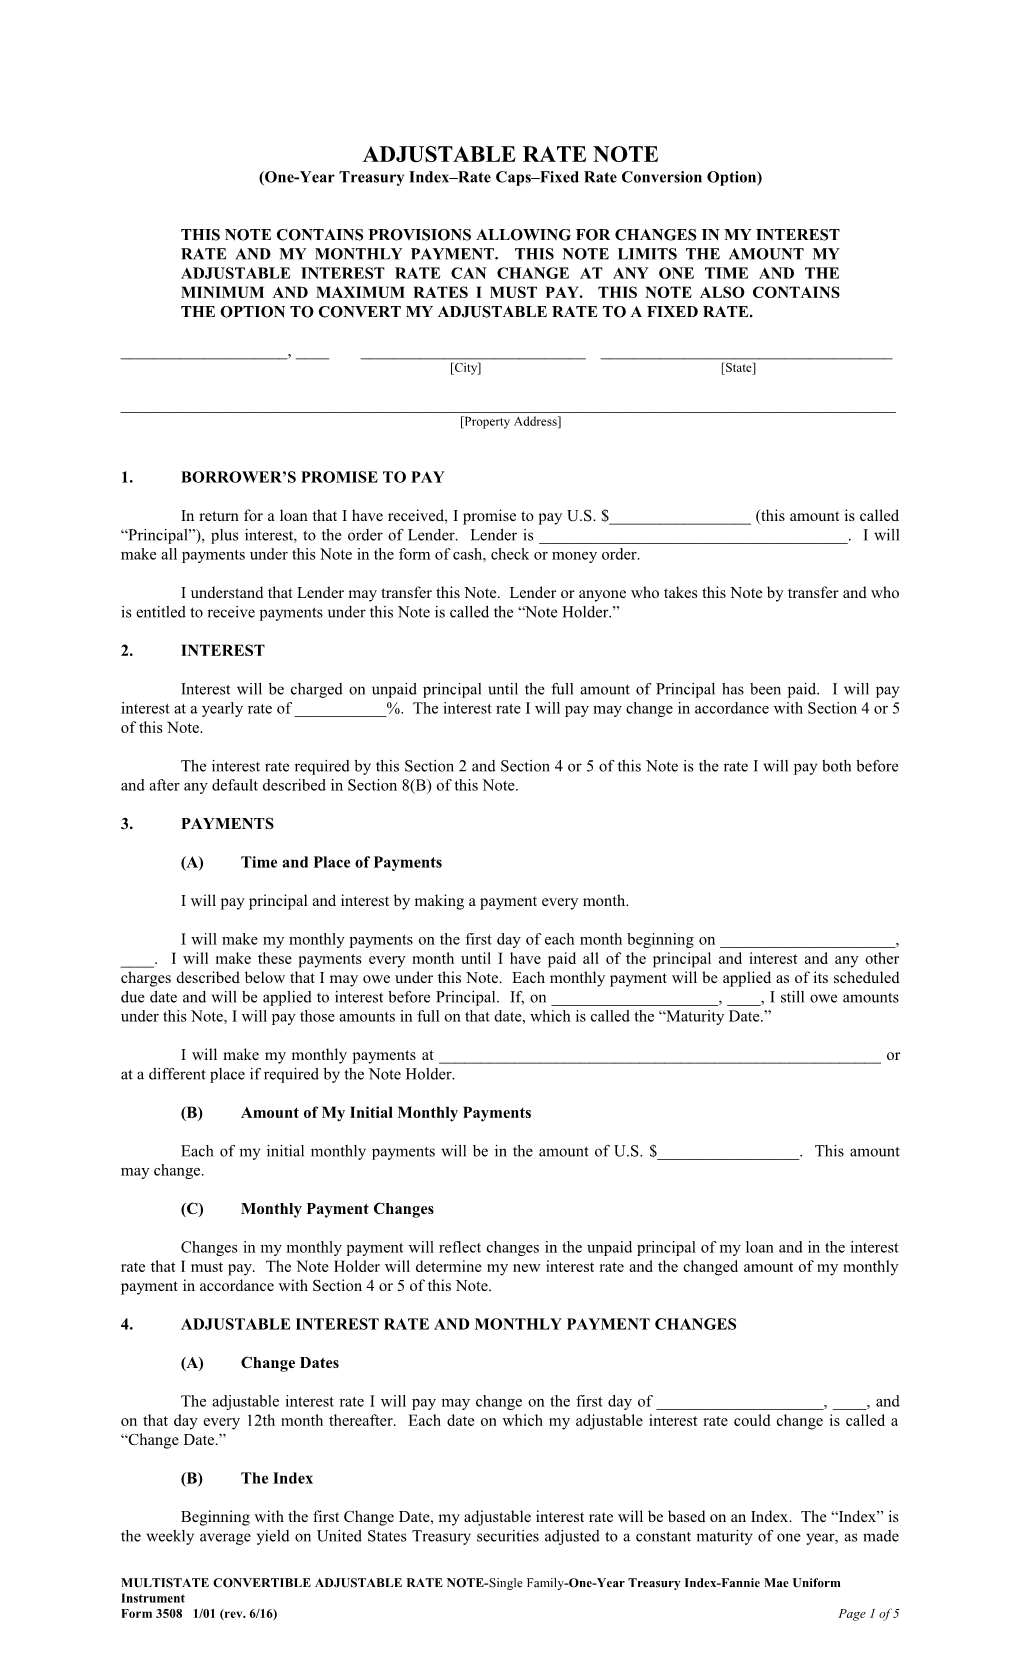 Multistate Convertible Adjustable Rate Note (Form 3508): Word